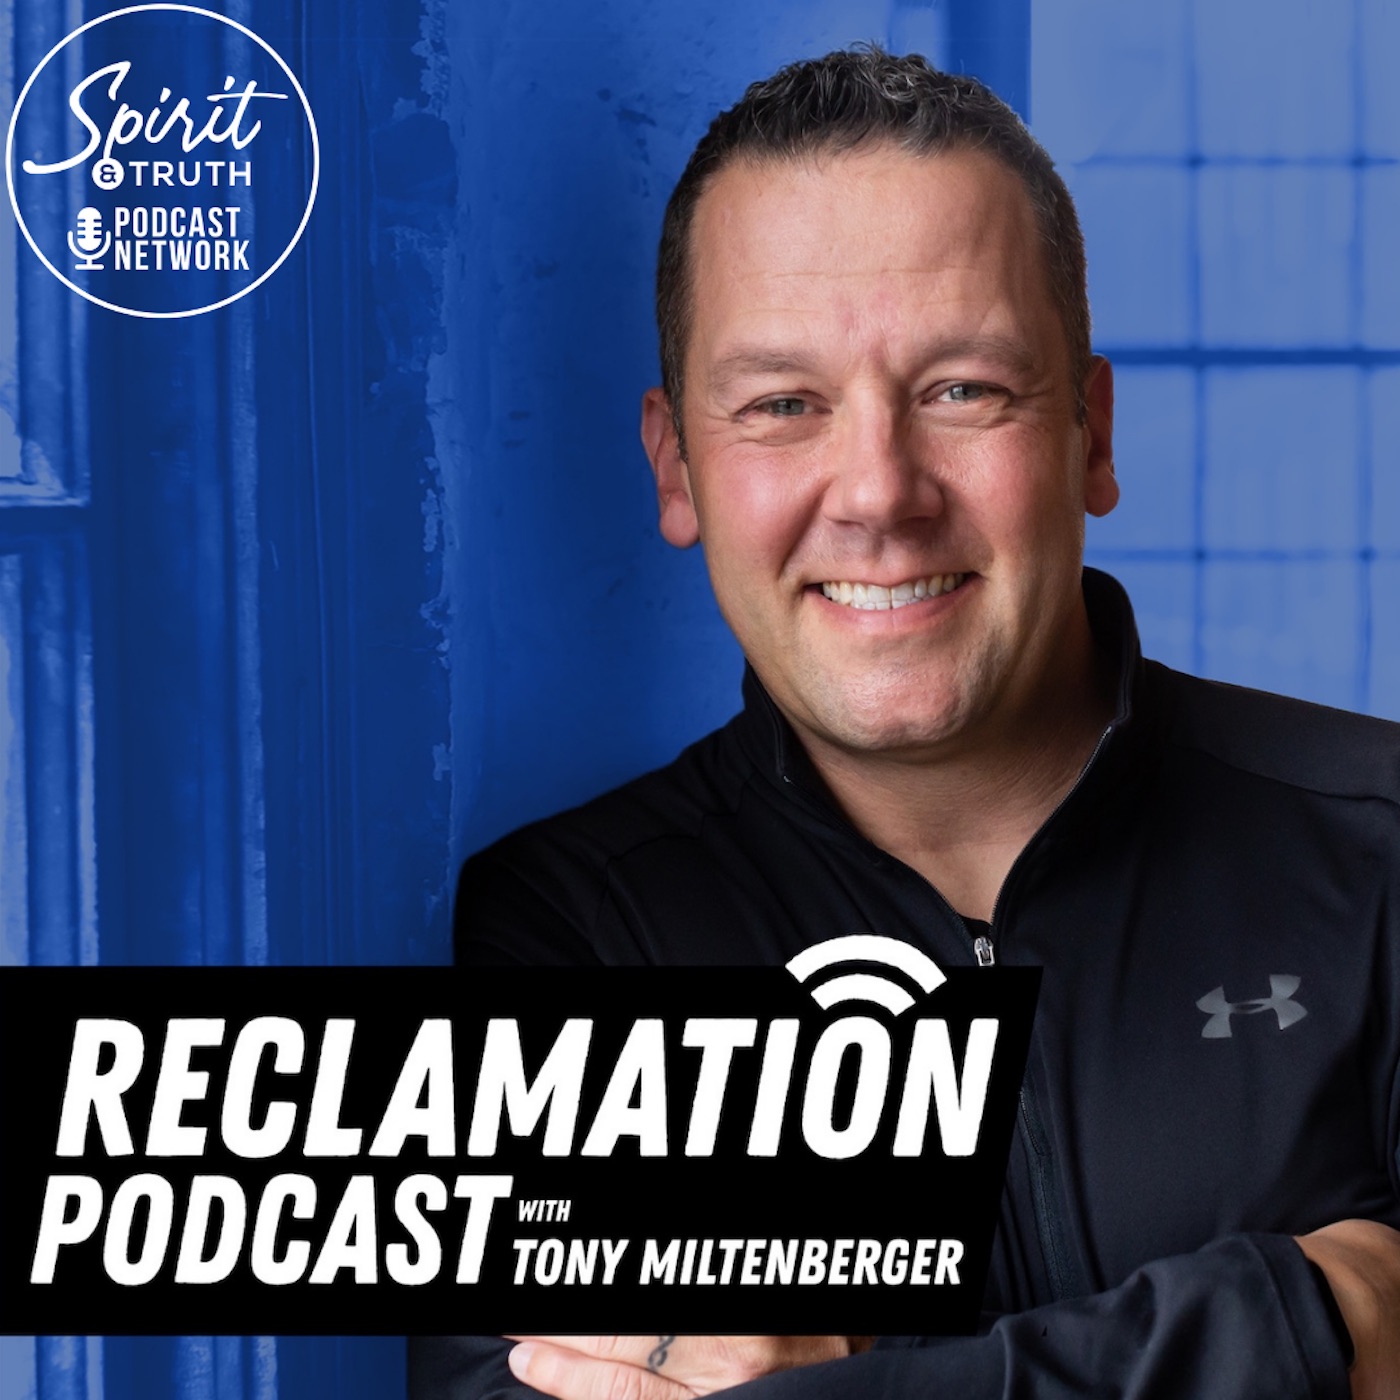 Reclamation Podcast: Reclaiming Good Practices for Faith and Life